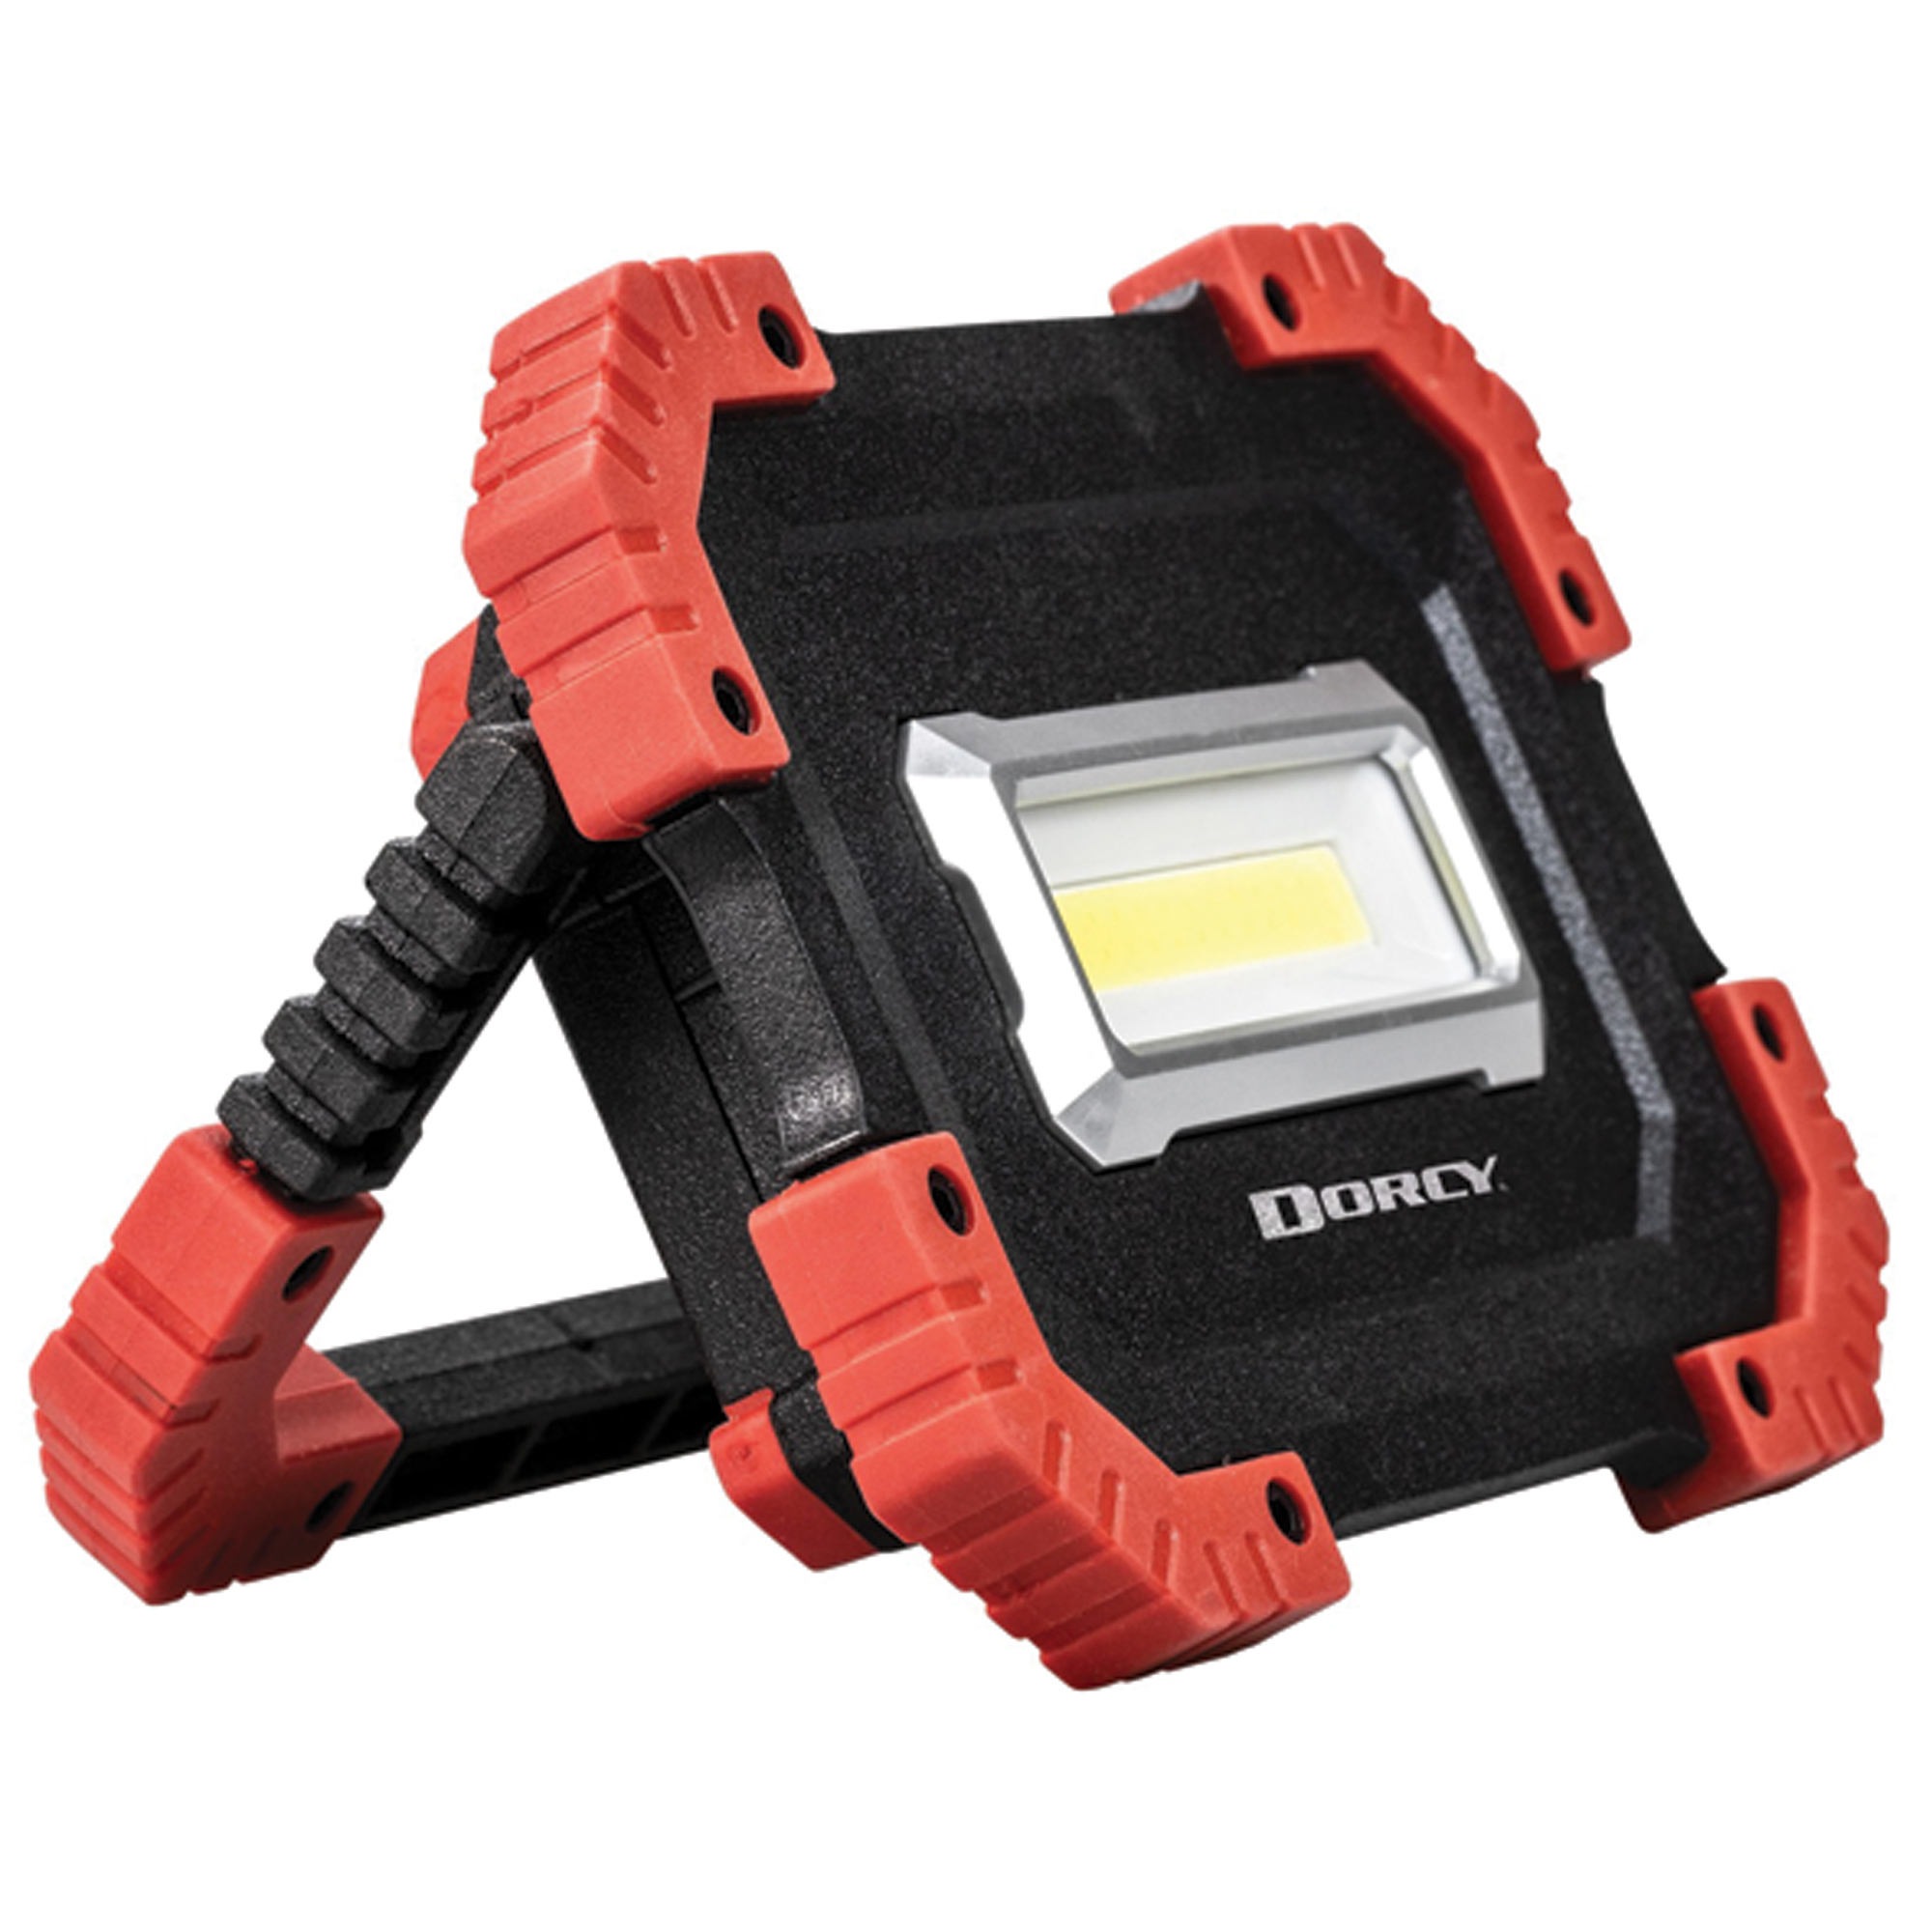 Dorcy, Ultra HD Rechargeable Utility Light with Powerbank, Light Output 1500 lumen, Light Bulb Type LED, Watts 17 Model 41-4336